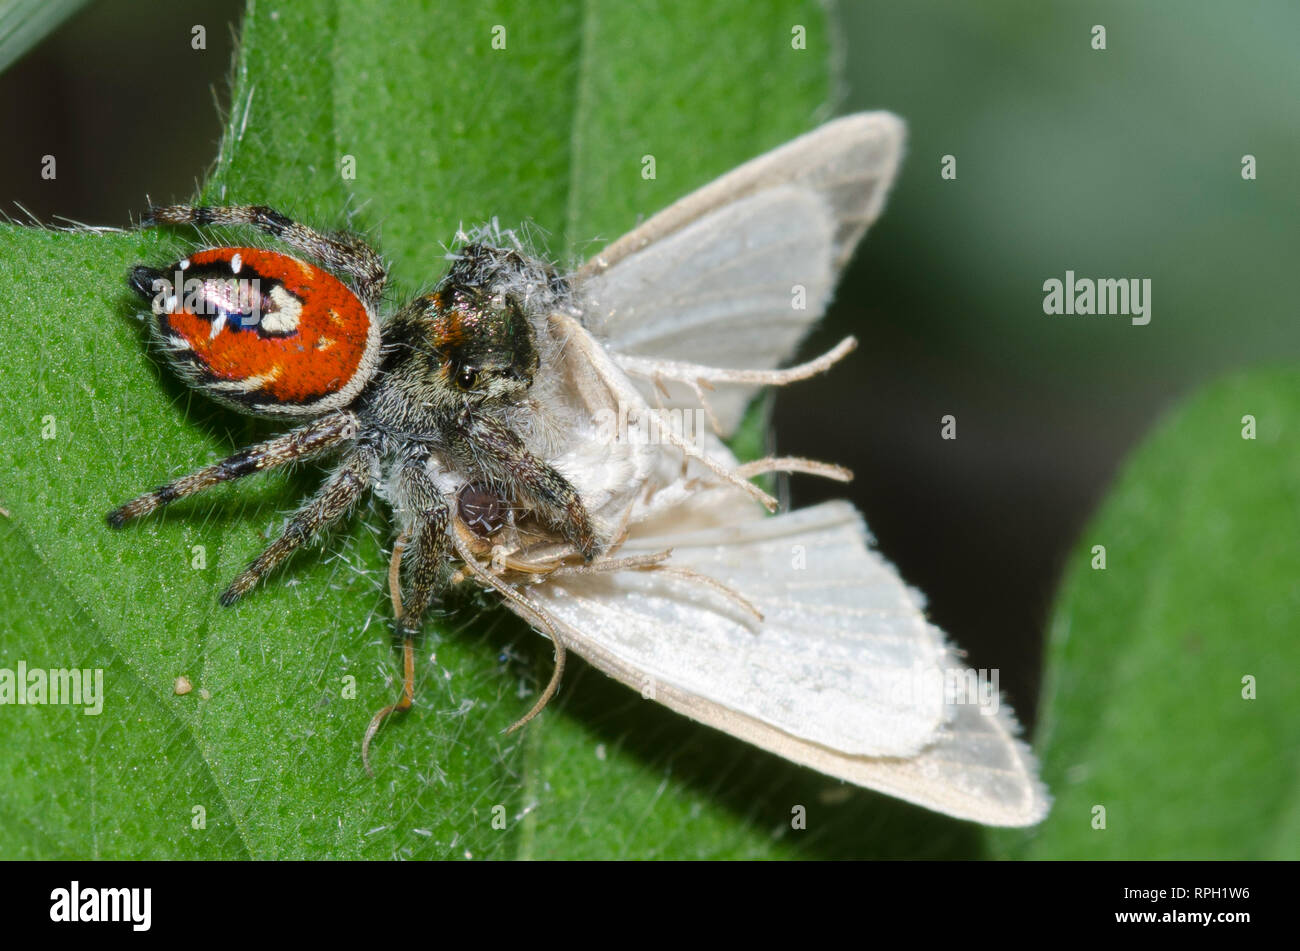 Jumping Spider, Phidippus sp., with moth, Order Lepidoptera, prey Stock Photo